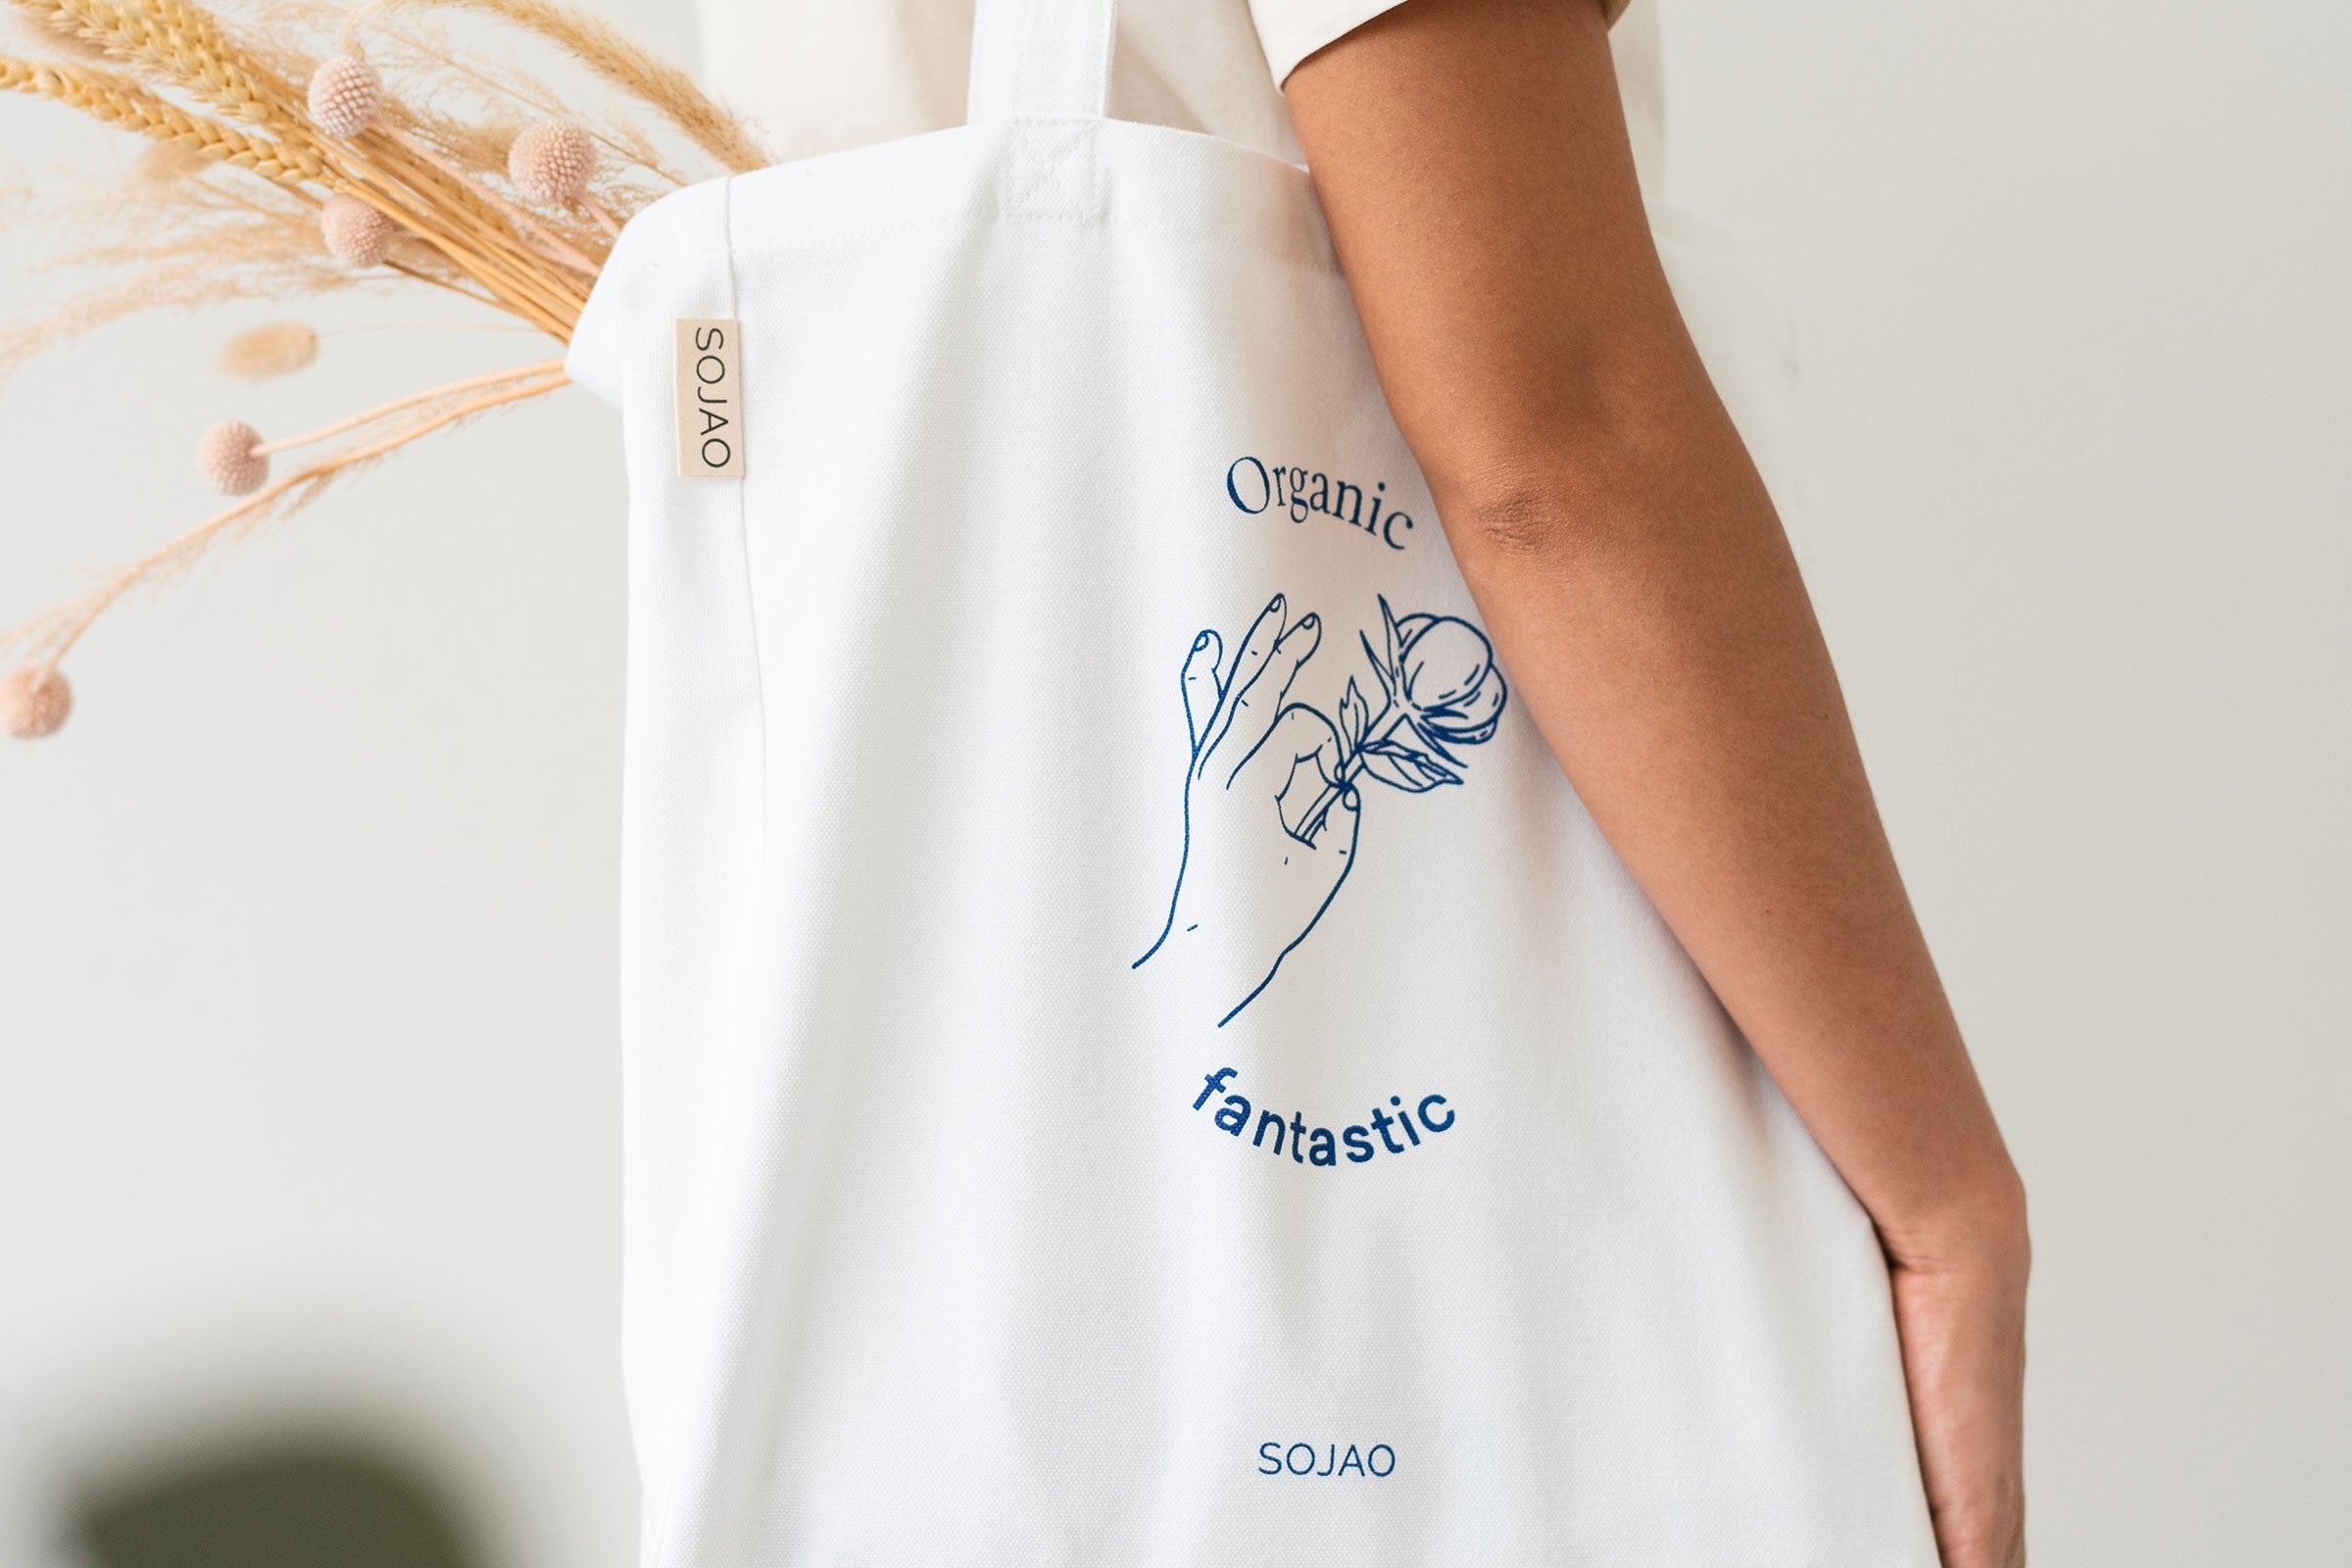 organic-cotton-tote-bag-in-white-colour-carrying-plants-by-sojao